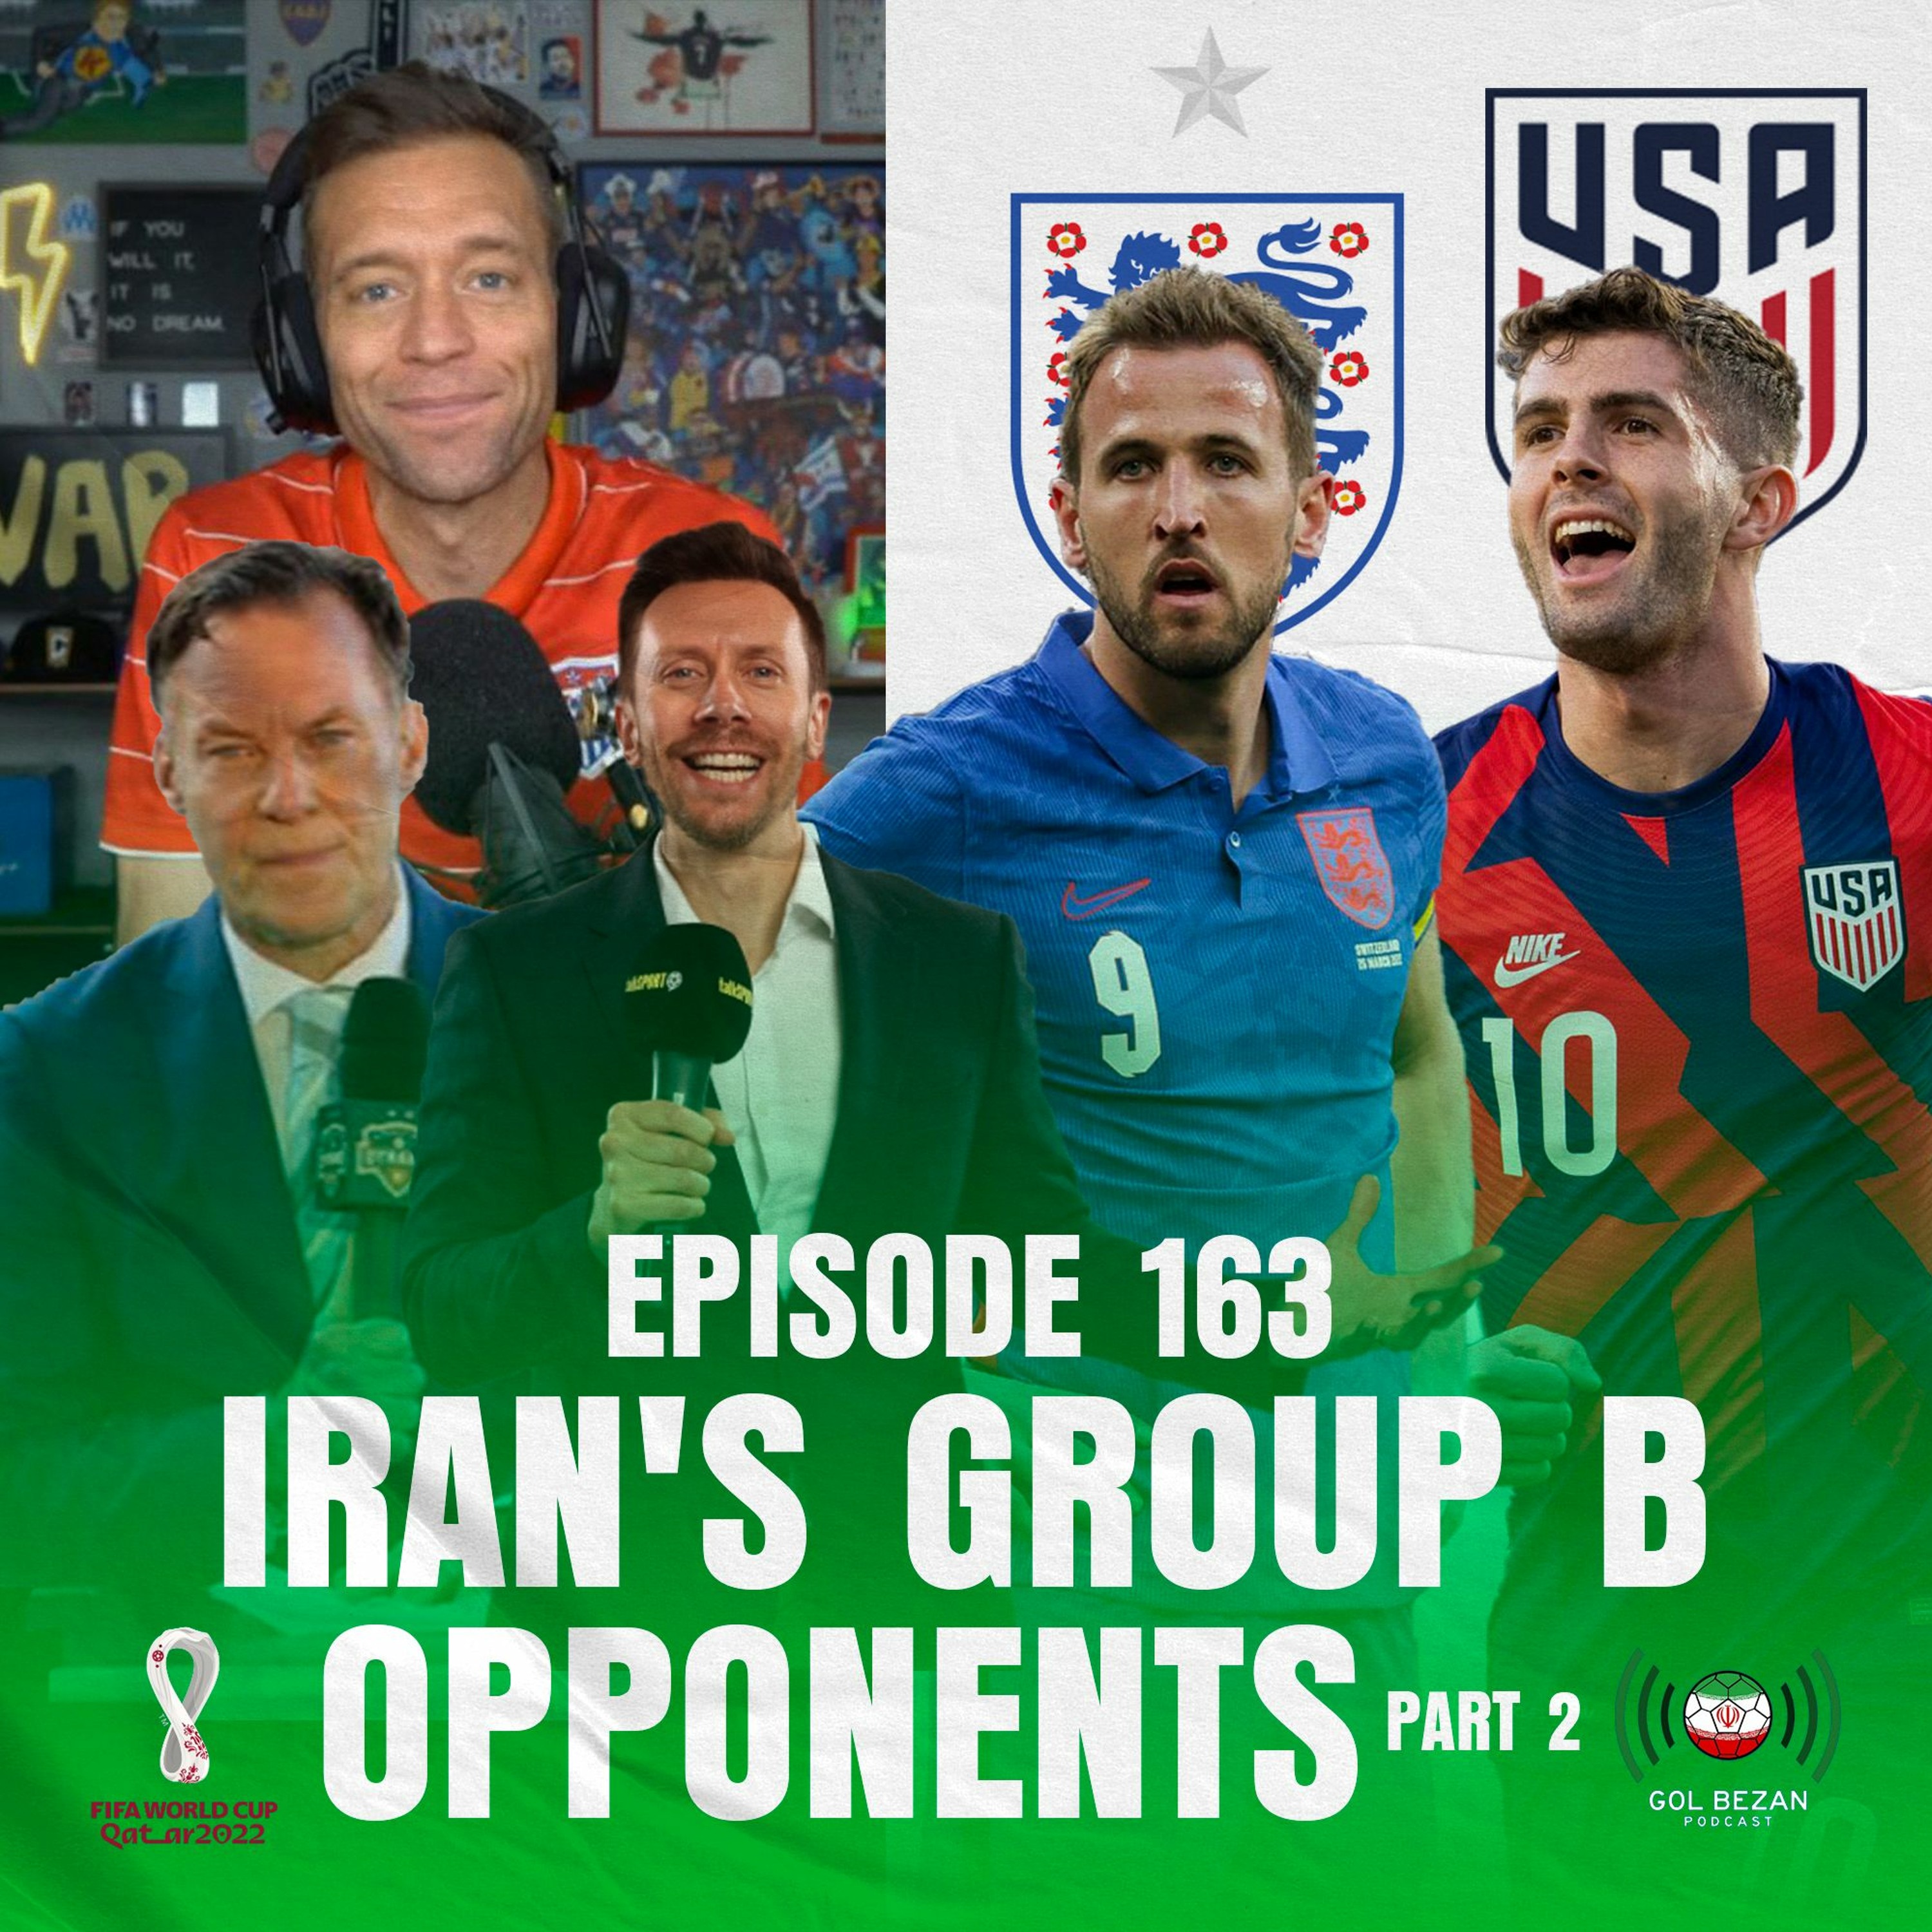 ENGLAND & USA | Iran's Group B Opponents Part 2 | 2022 FIFA World Cup